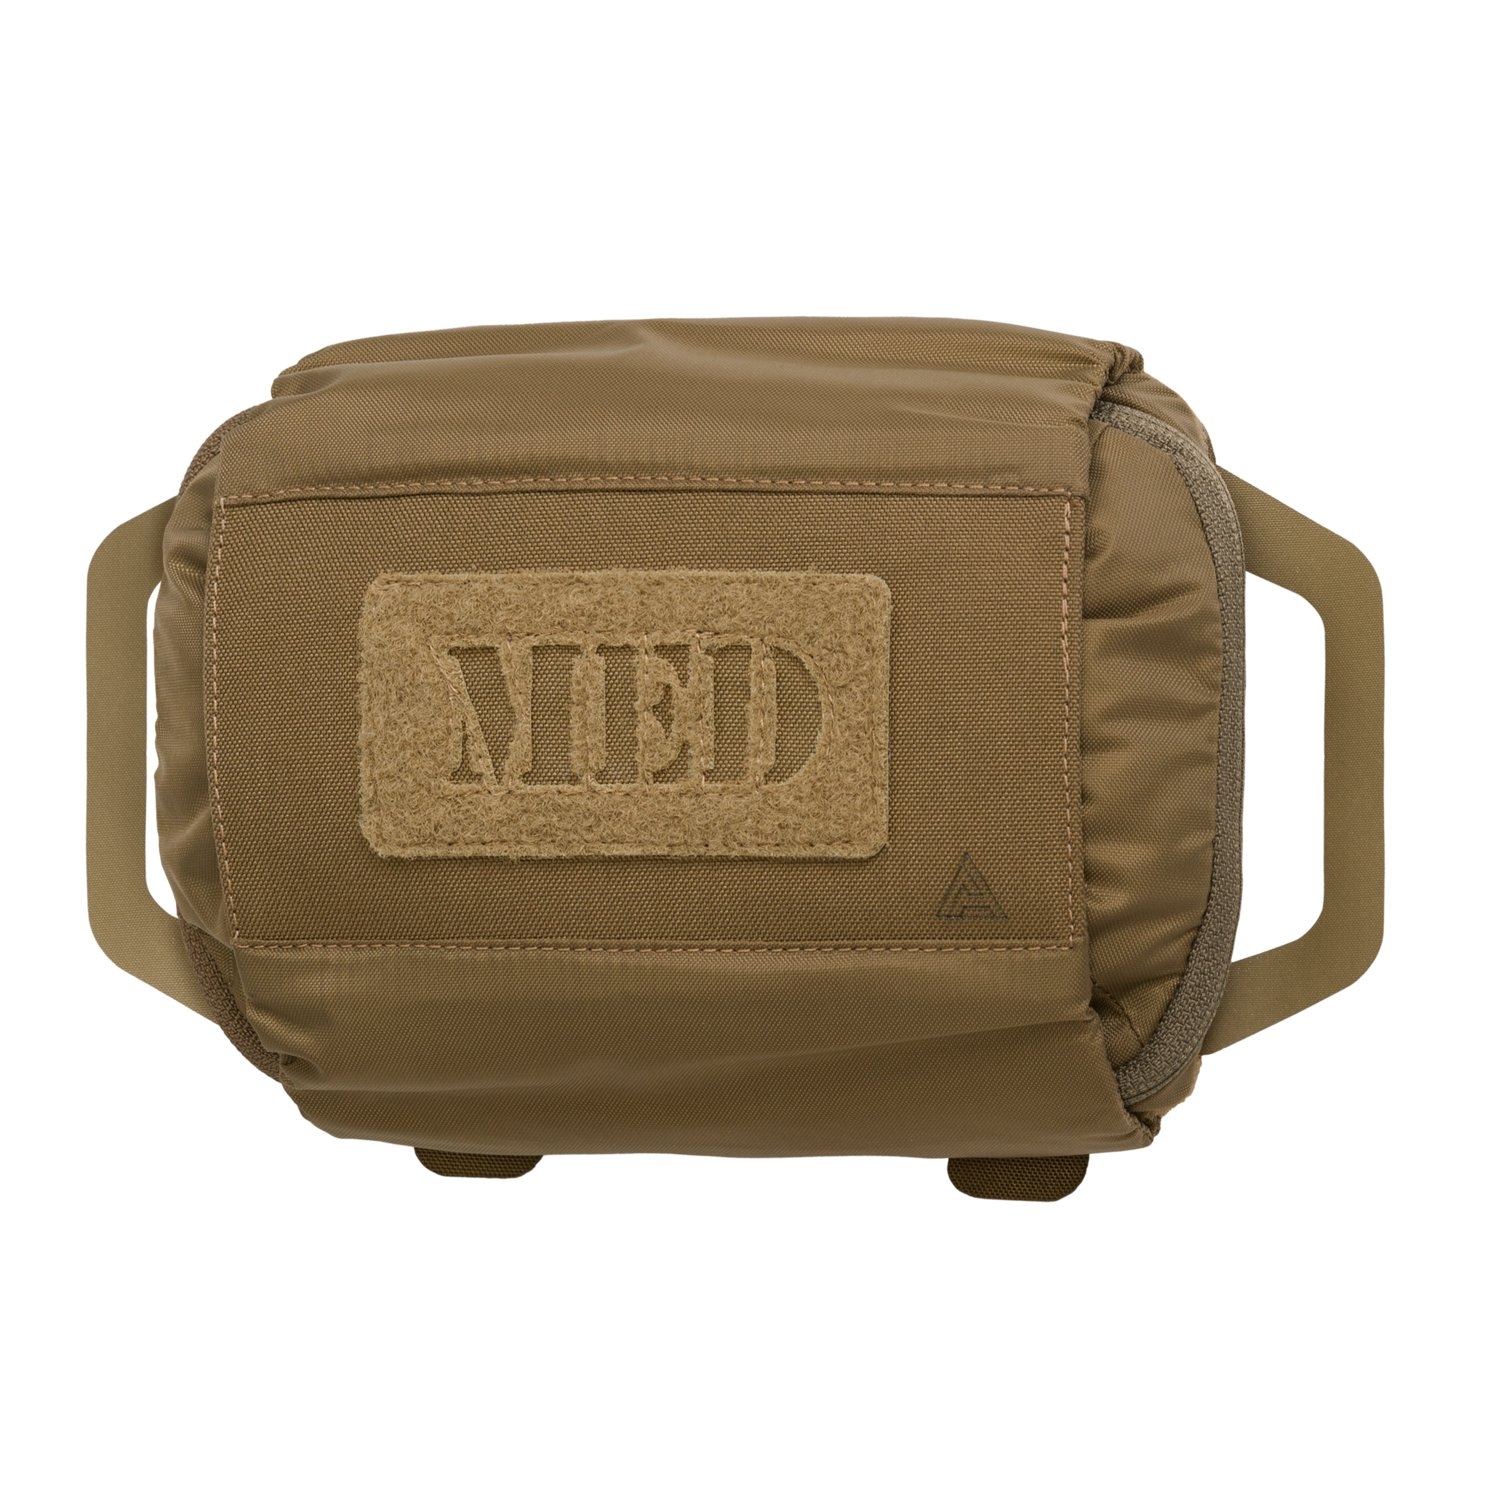 Image of apteczka direct action pouch horizontal mk iii - cordura - coyote brown - one size (po-mdh3-cd5-cbr)